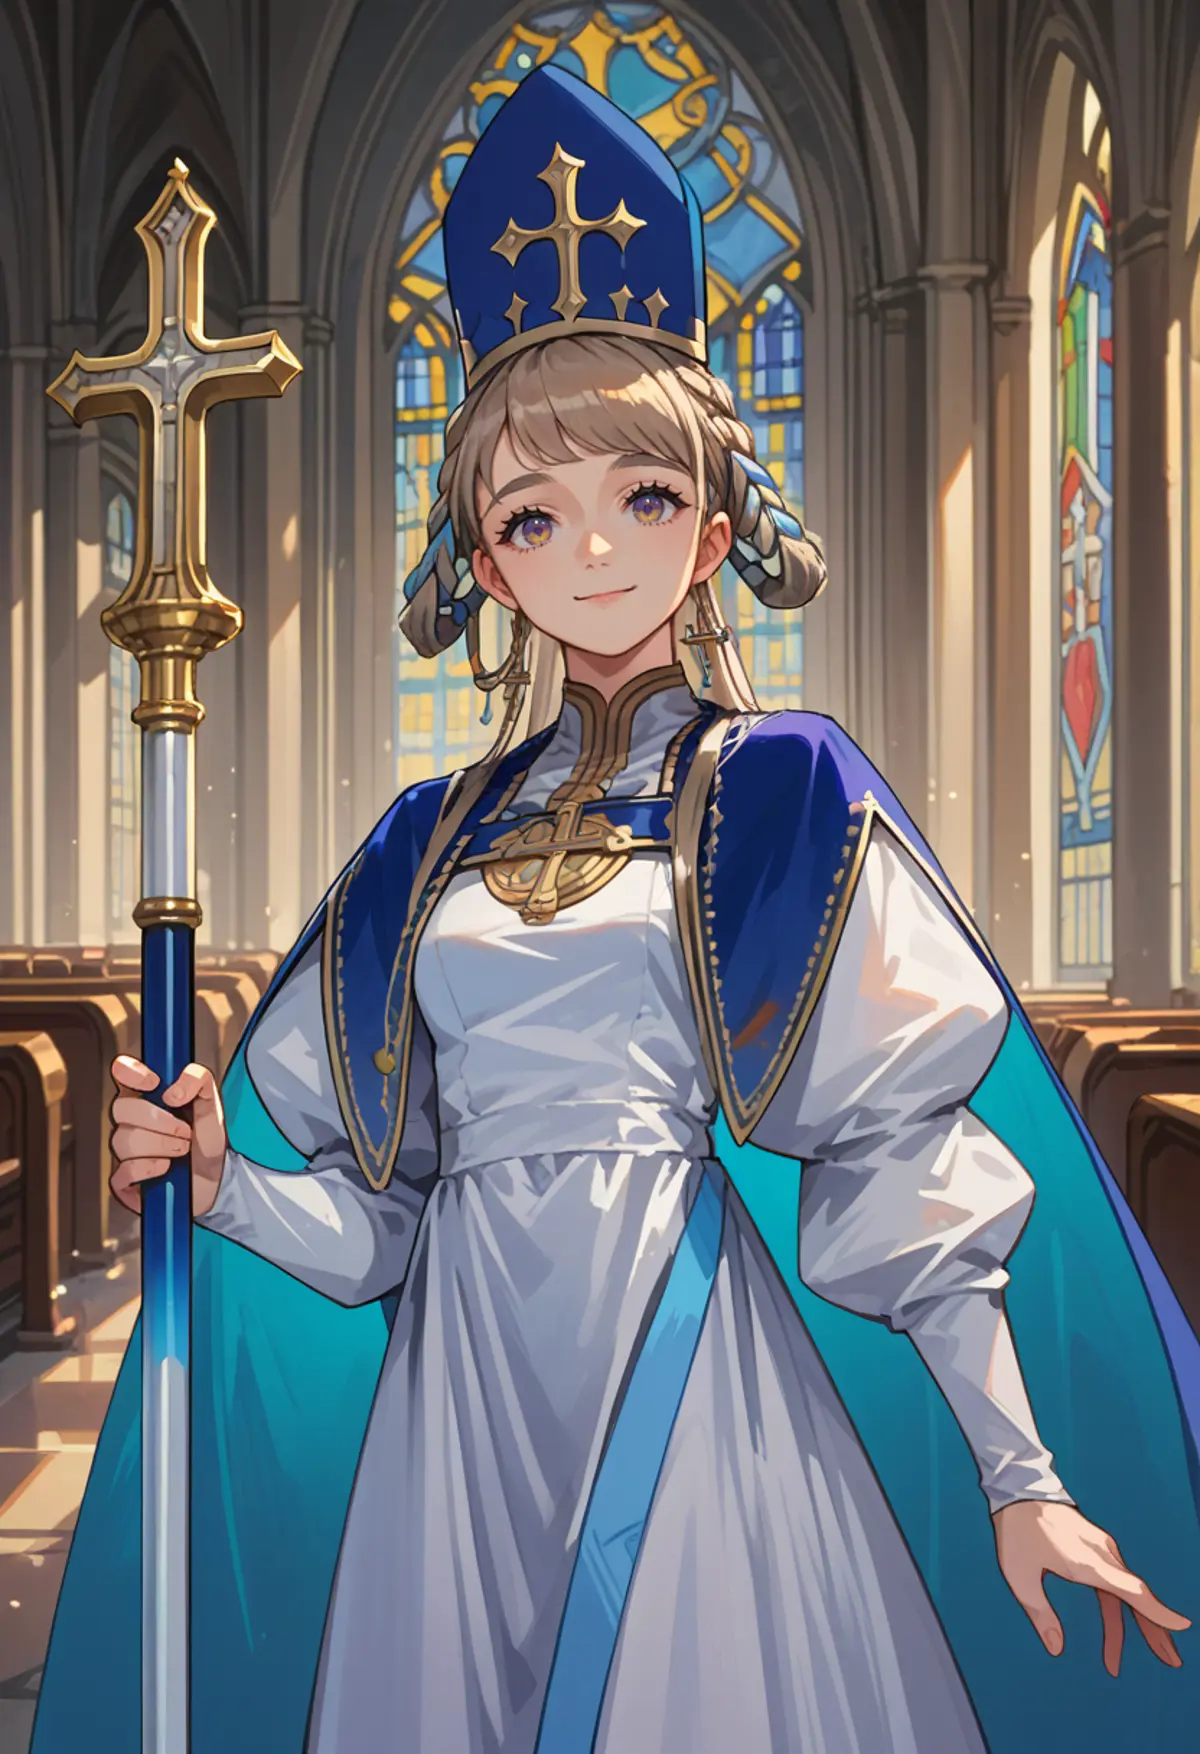 A young woman standing in a cathedral, holding a cross-topped scepter. She is dressed in elaborate religious regalia, including a mitre and a blue and white robe with gold accents. Behind her, the cathedral is adorned with tall stained-glass windows. 